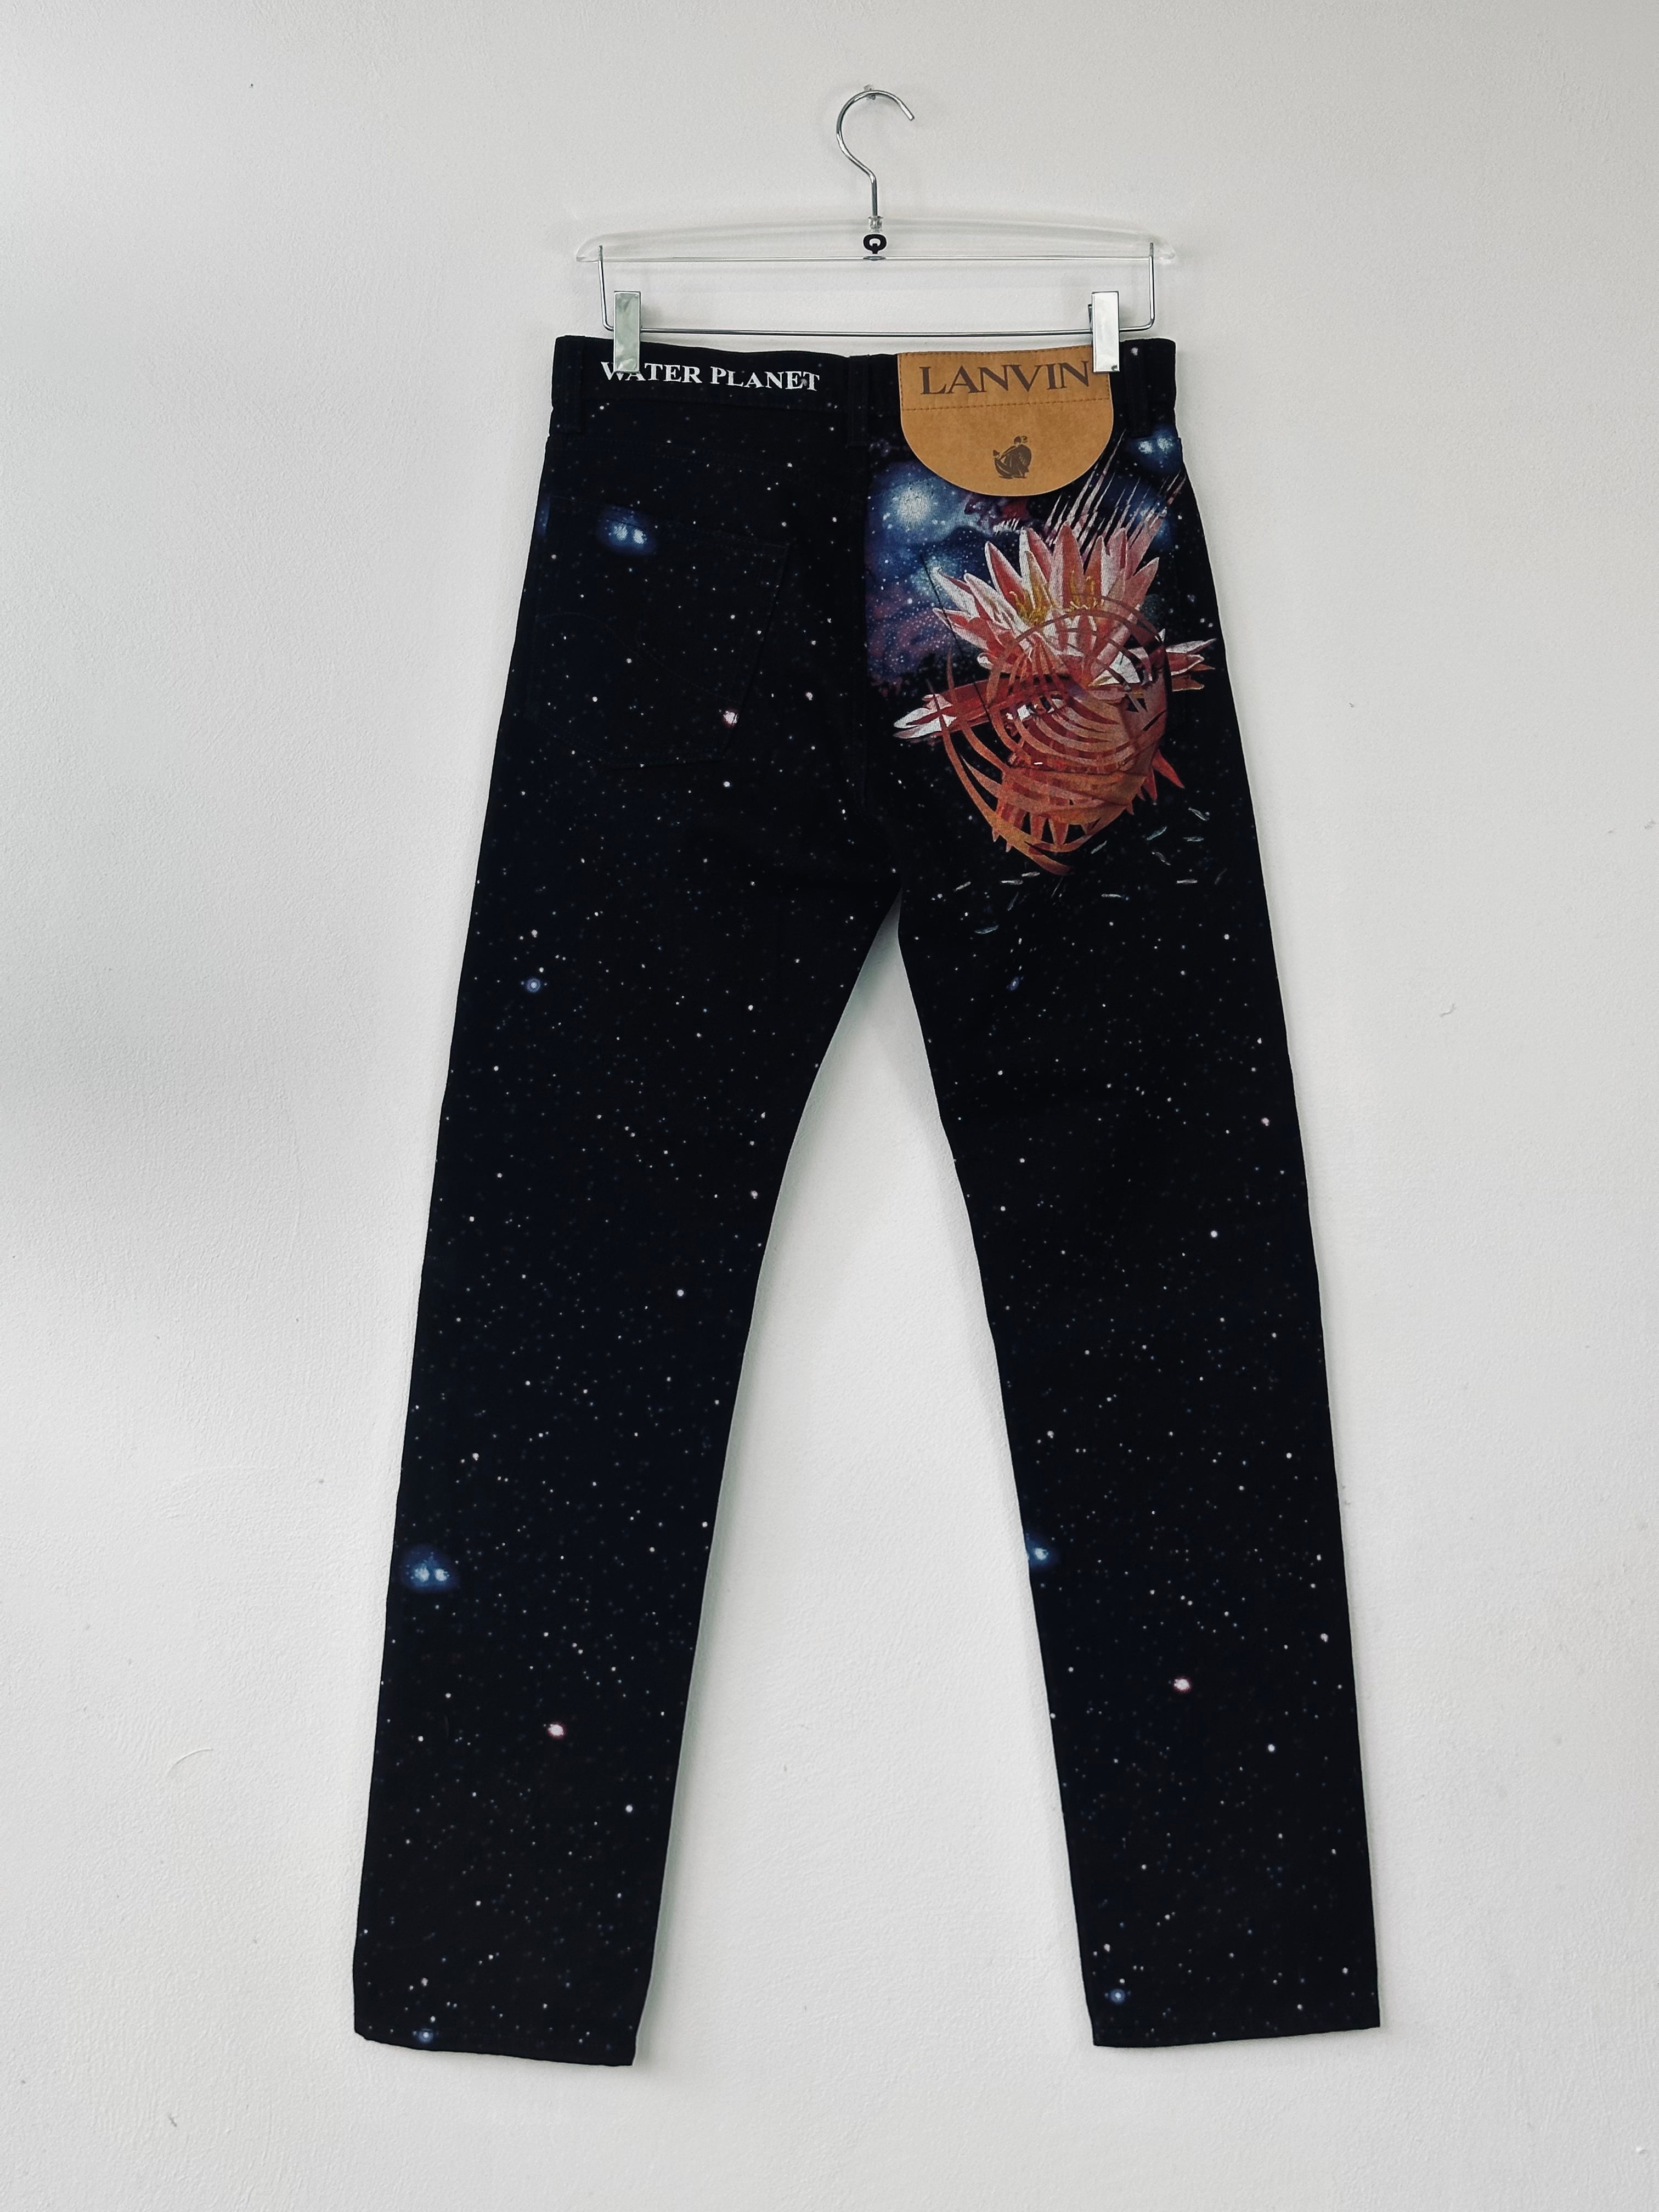 Water Planet Jeans